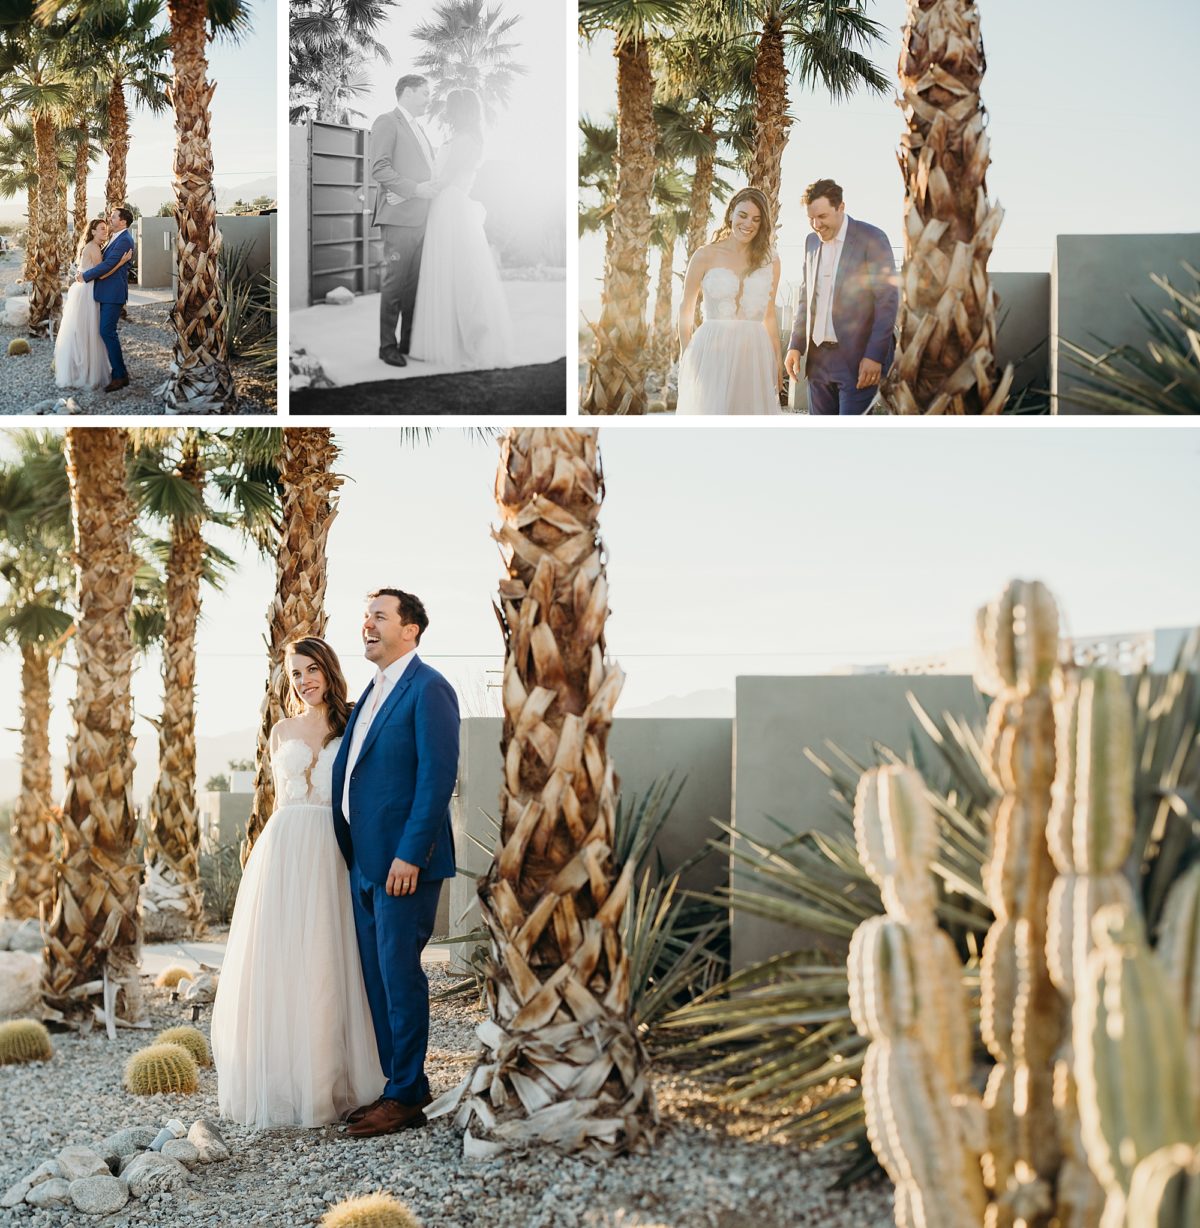 Bridal portraits at The Lautner Compound by Briana Morrison